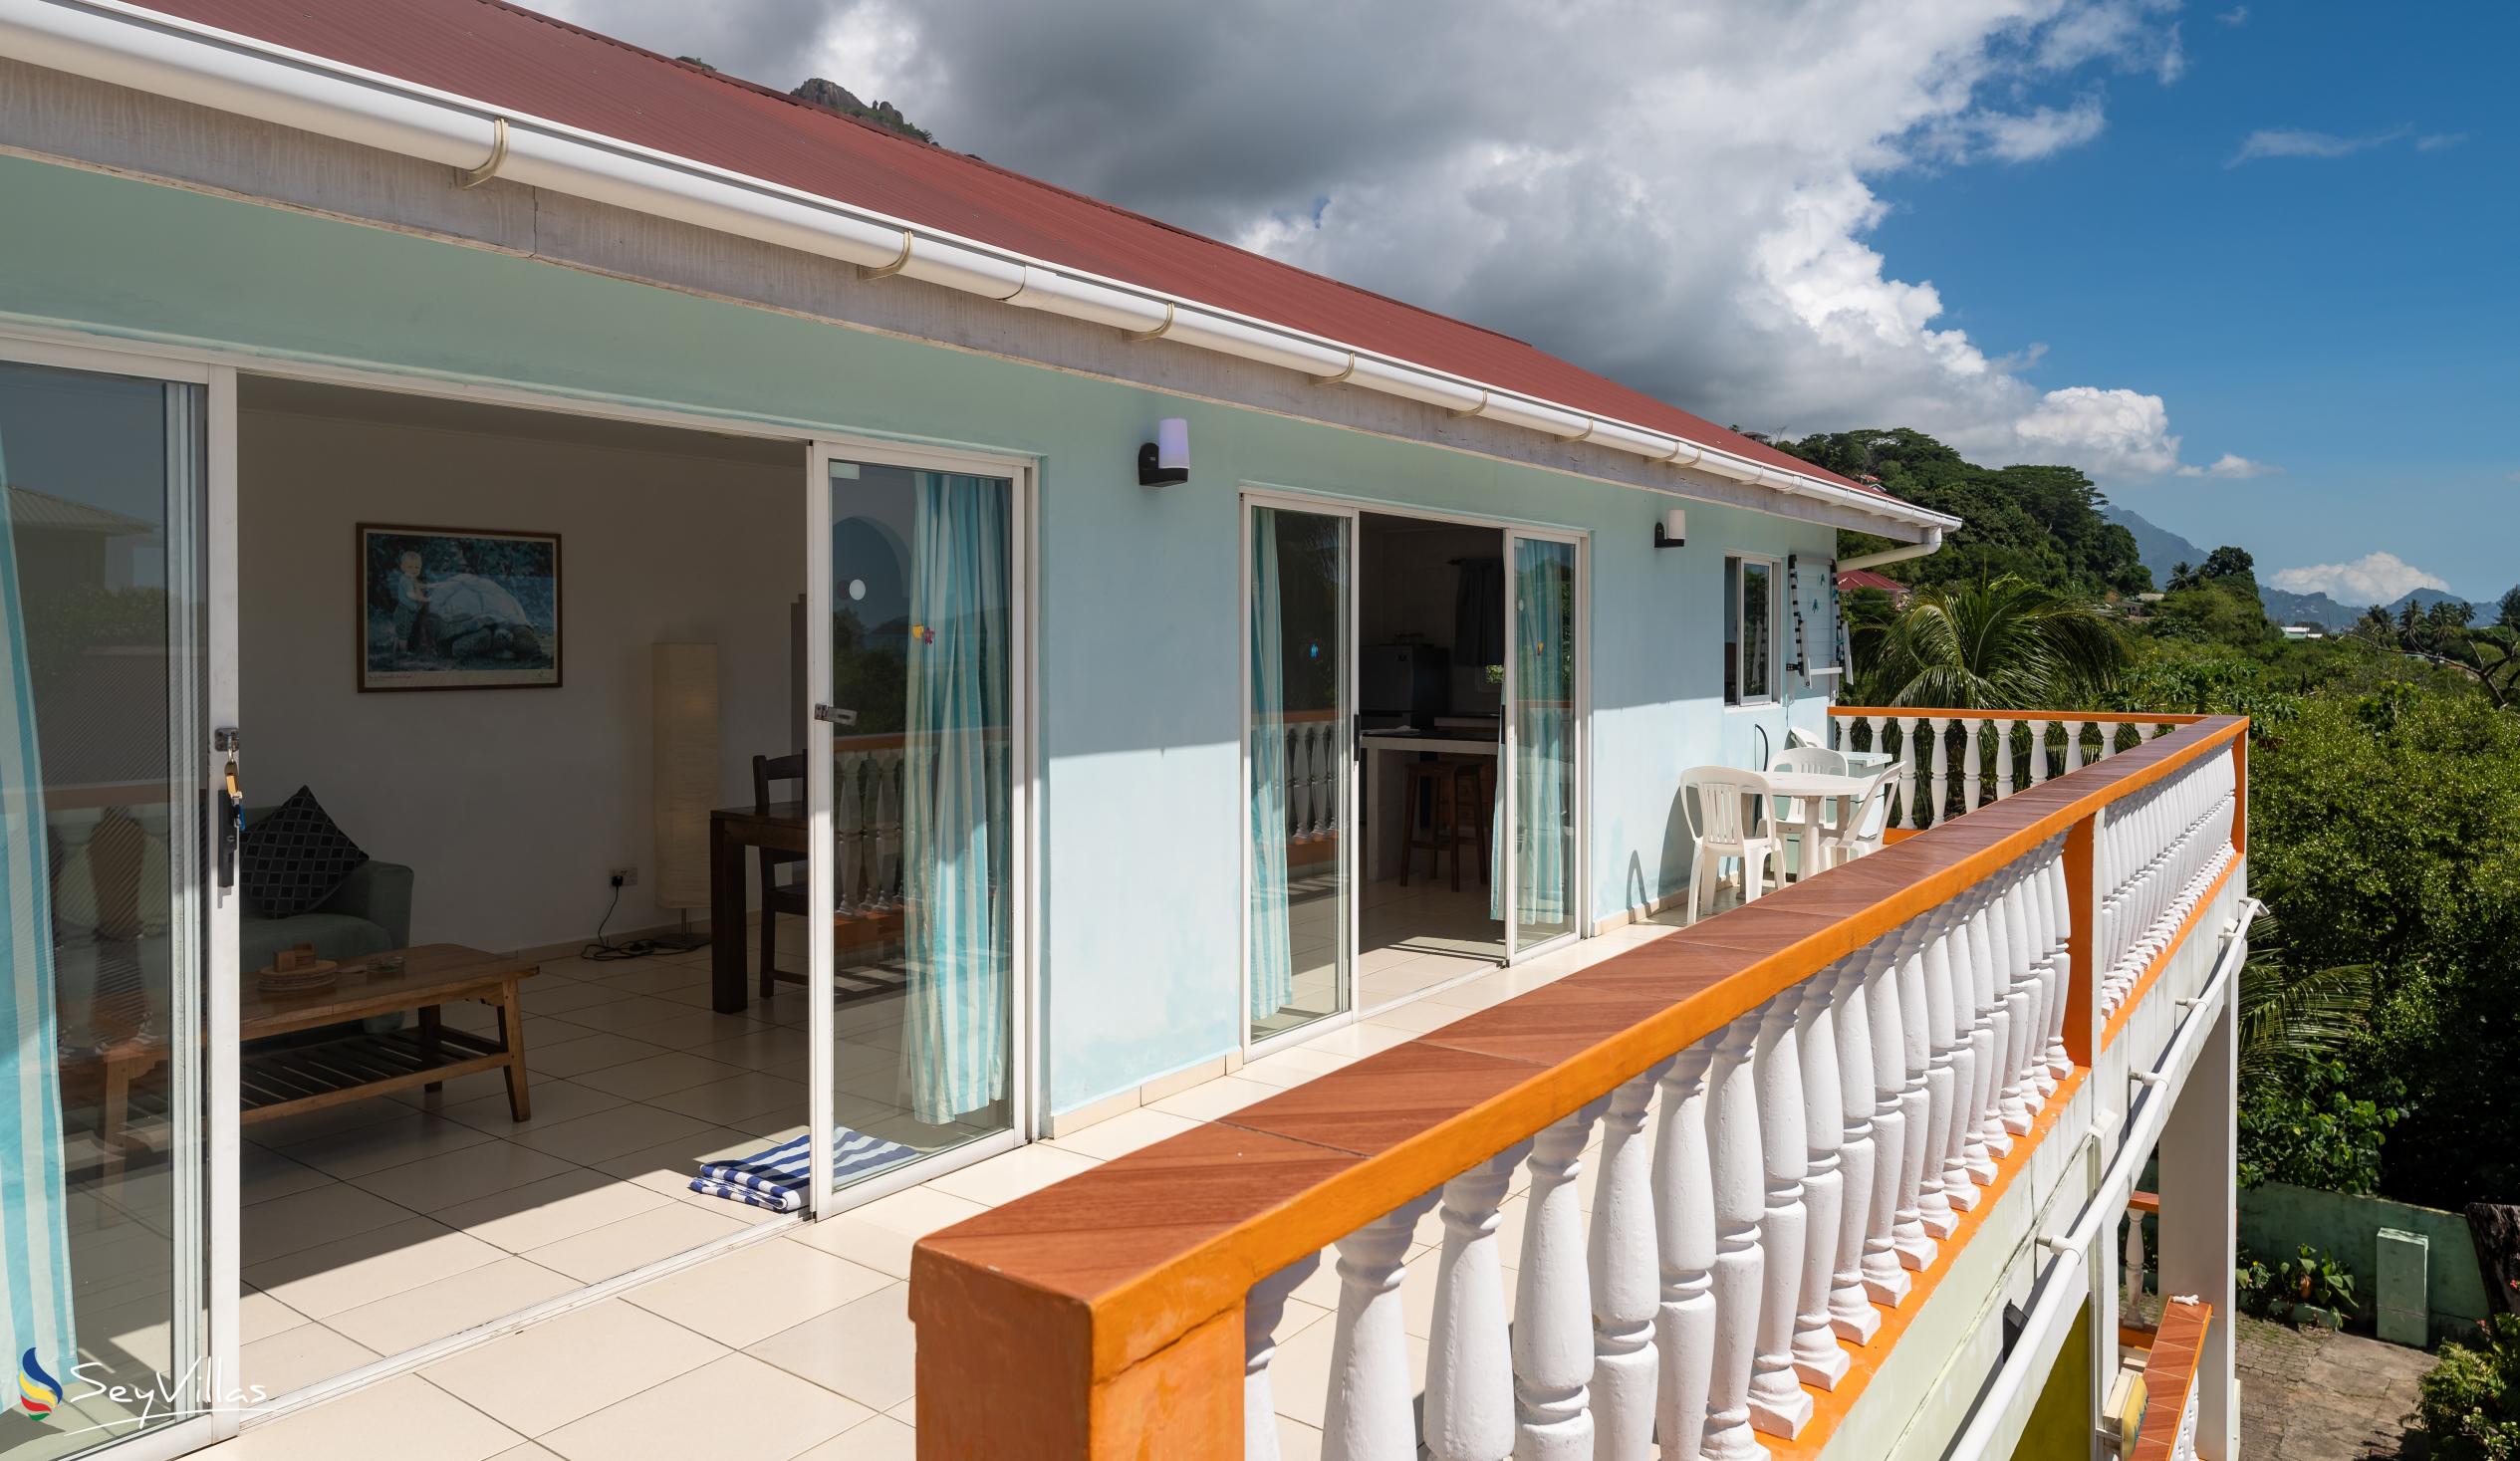 Foto 48: Chez Payet Self Catering - 2-Schlafzimmer-Appartement Coco - Mahé (Seychellen)